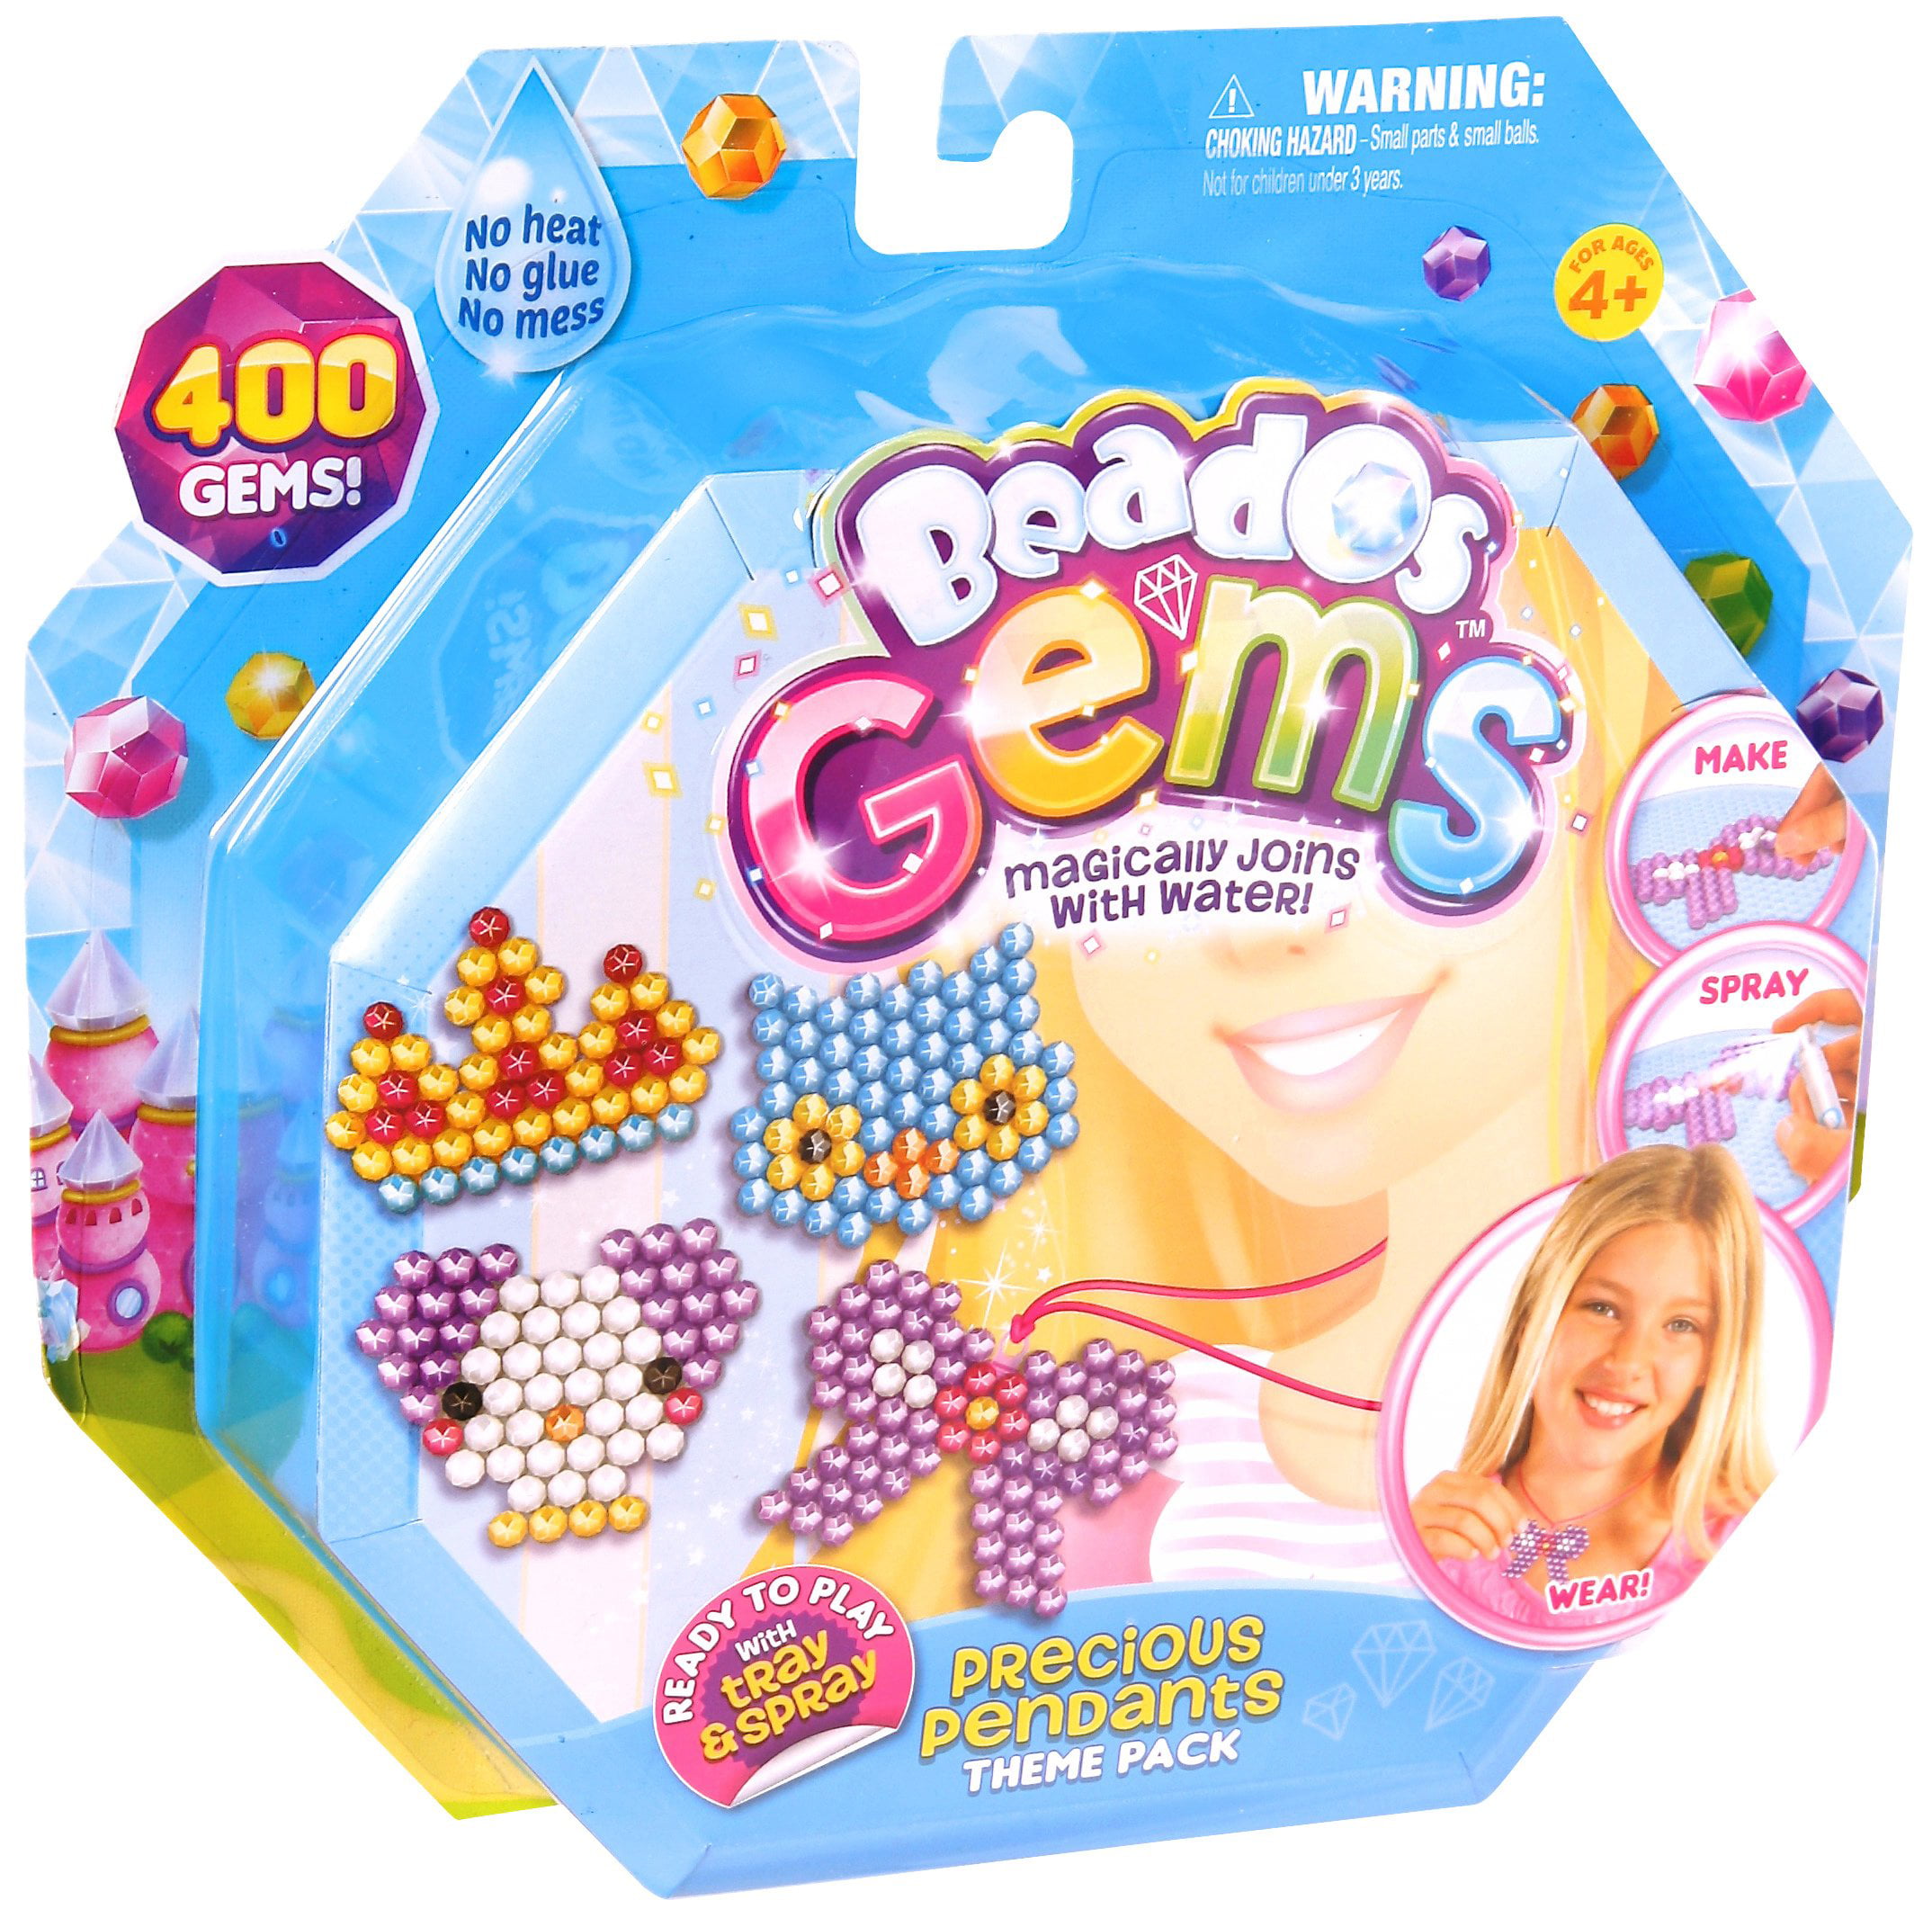 Beados B Sweet Tropical Delights Theme PK Moose Toys 10723 Join W/water  500beads for sale online